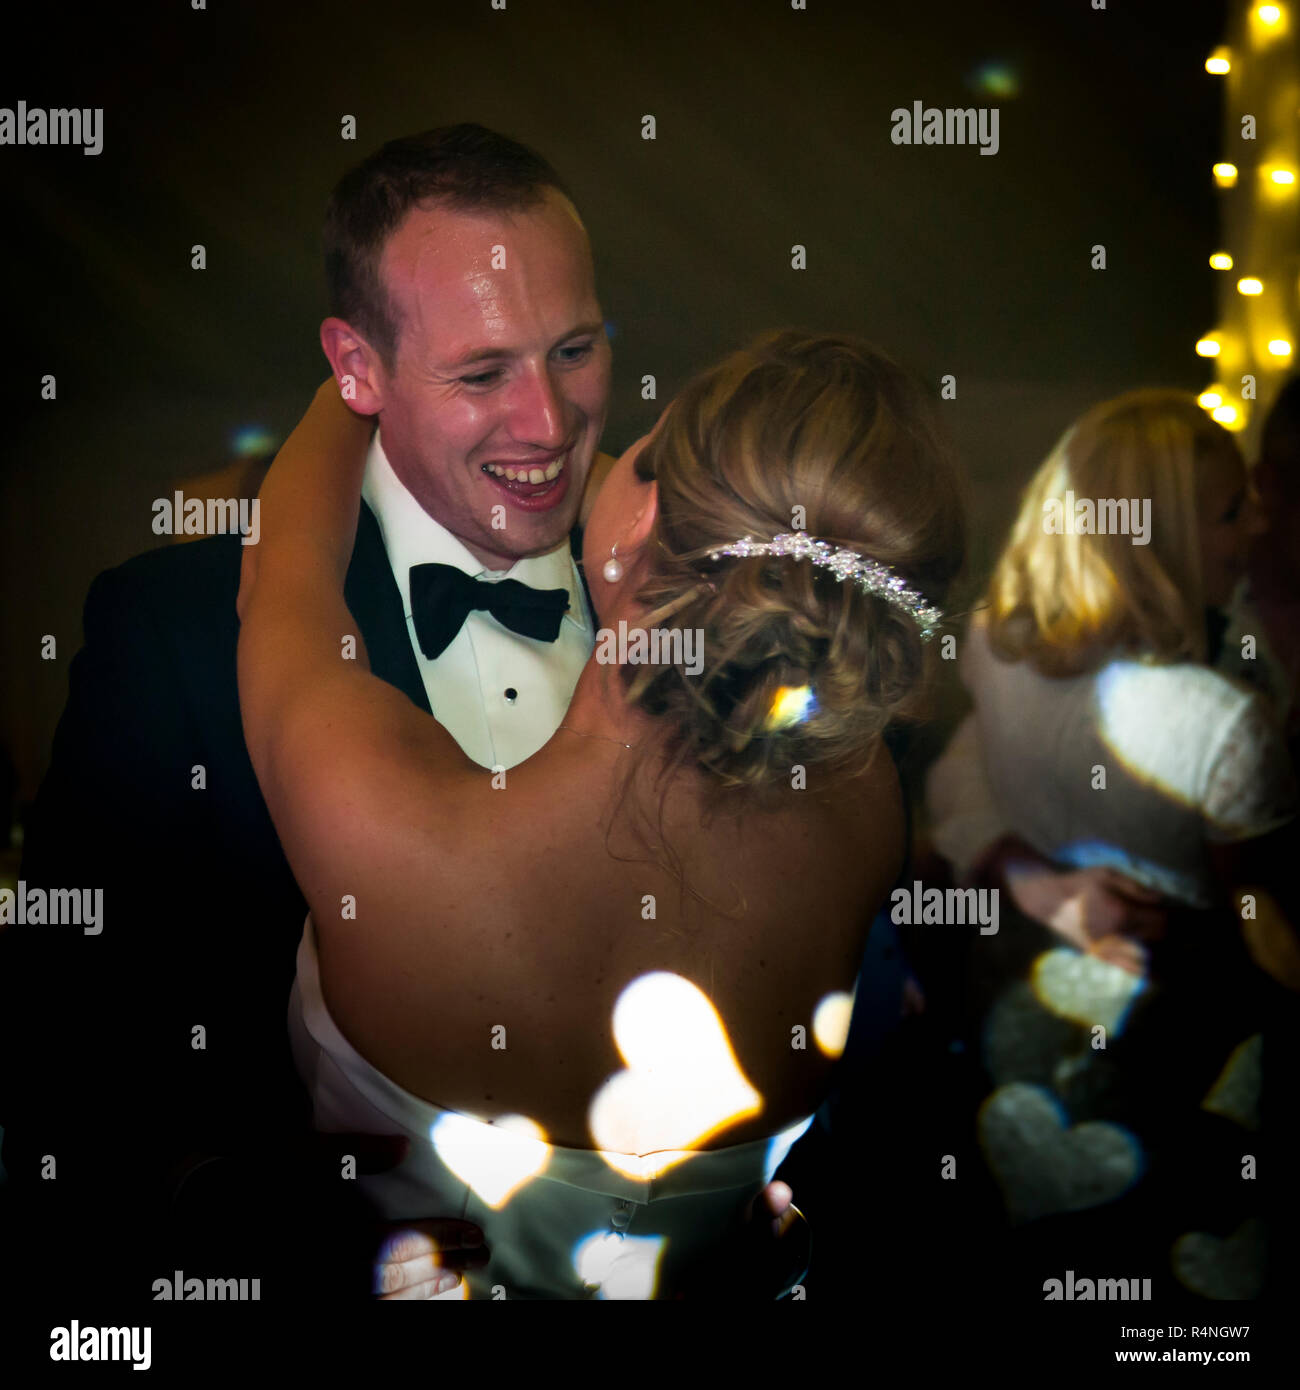 Bride and groom on dance floor with projection of hearts on bride's back Stock Photo